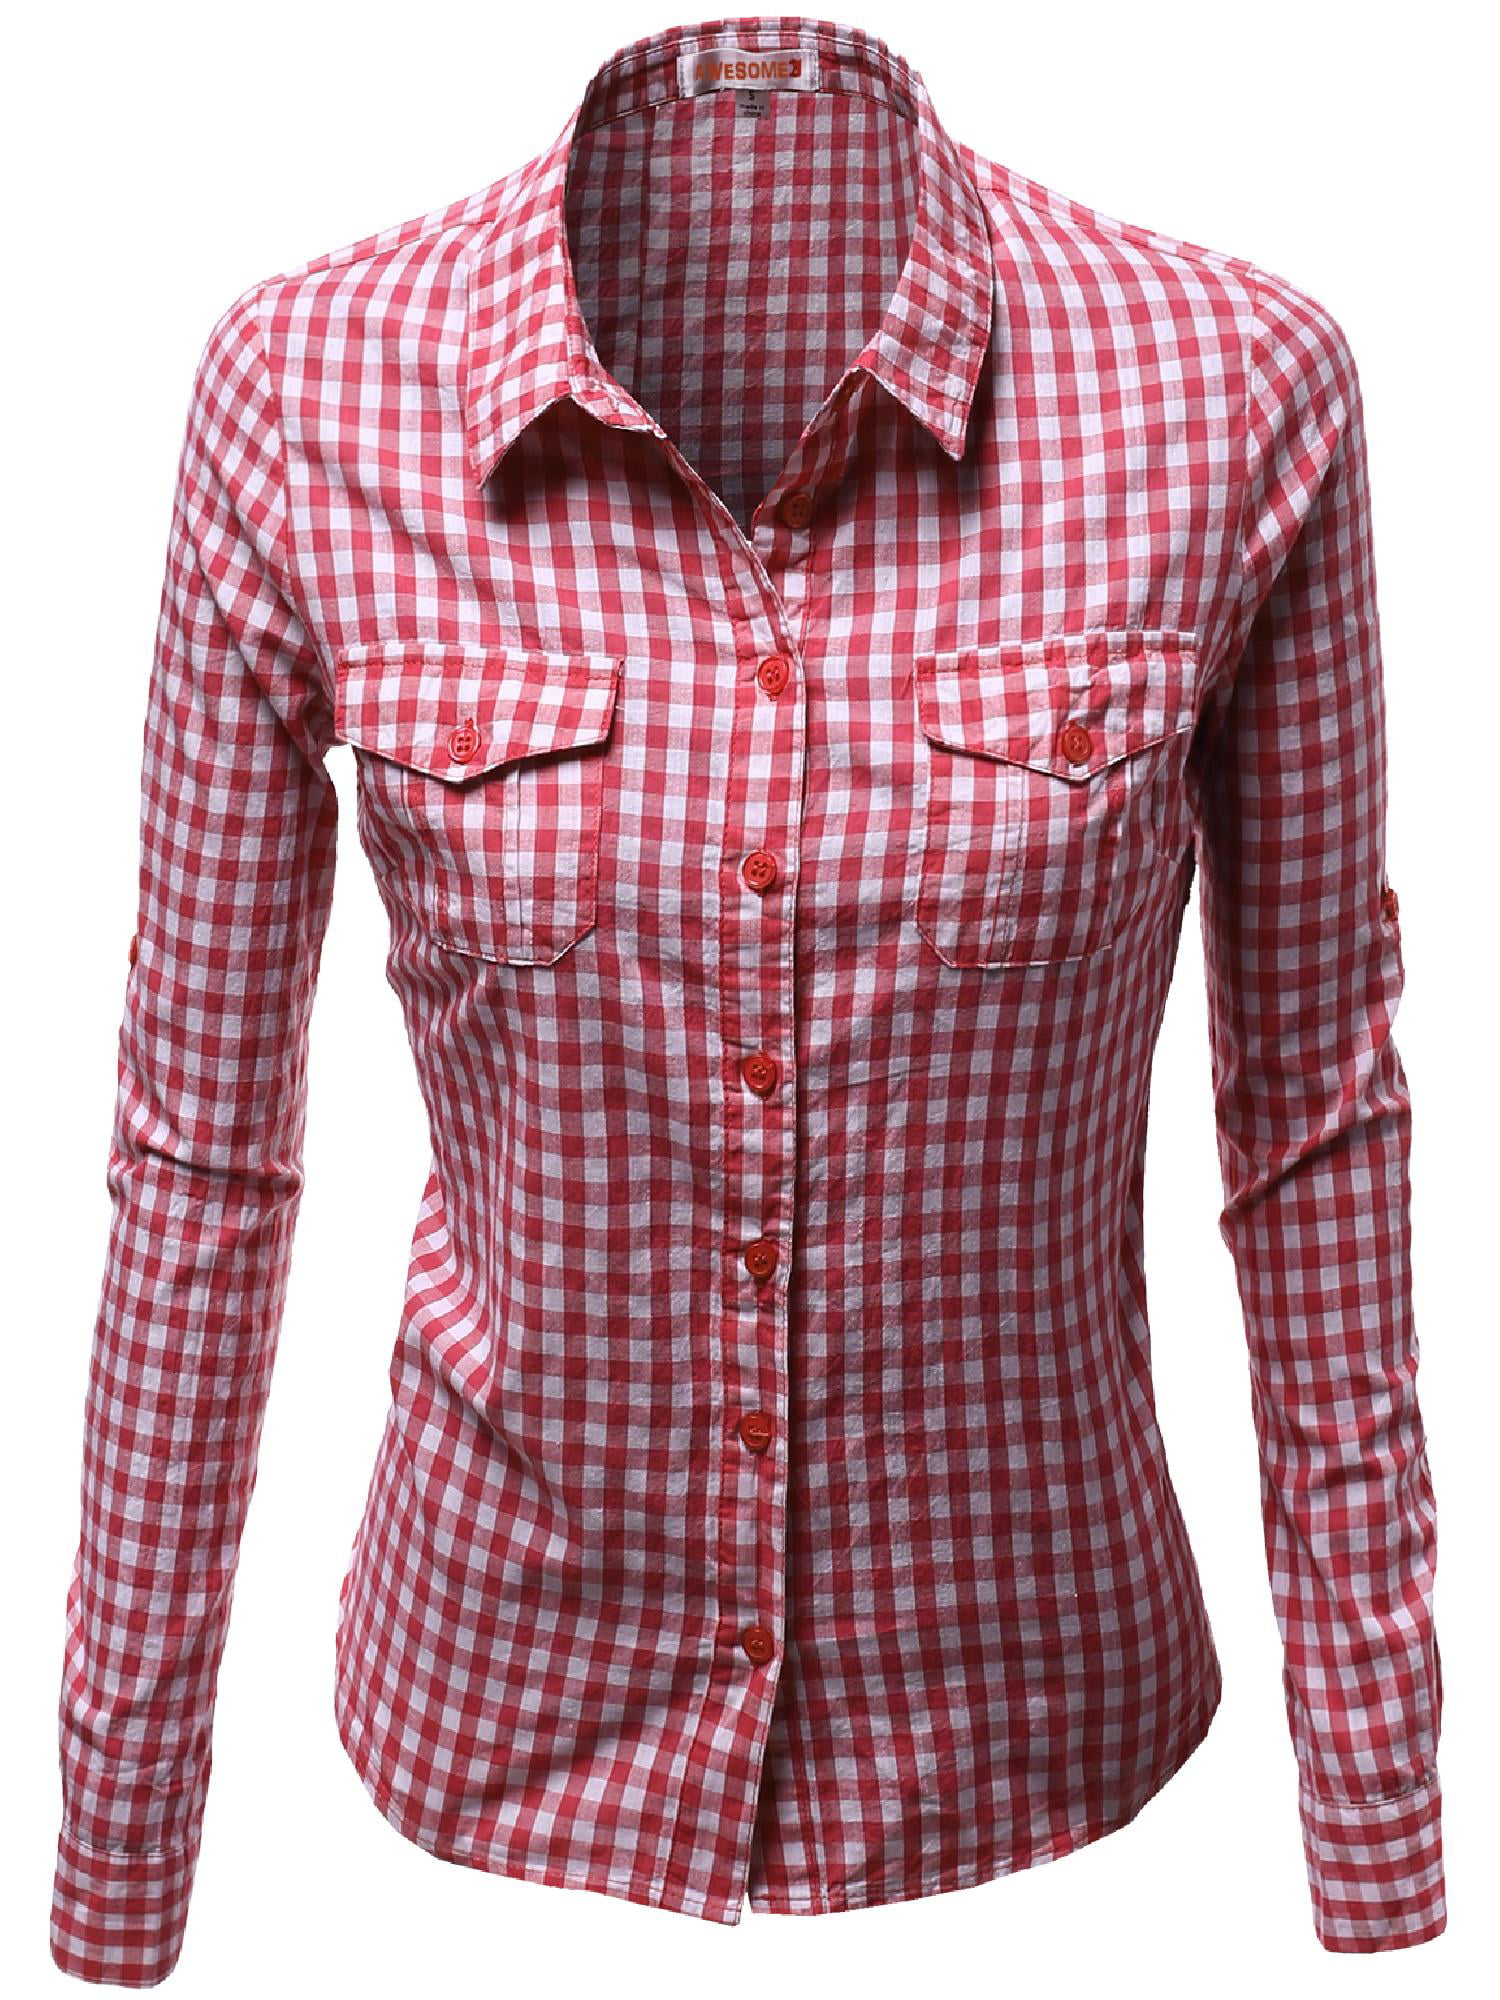 FashionOutfit Women's Basic Slim Fit Roll Up Sleeve Plaid Shirt Blouses ...